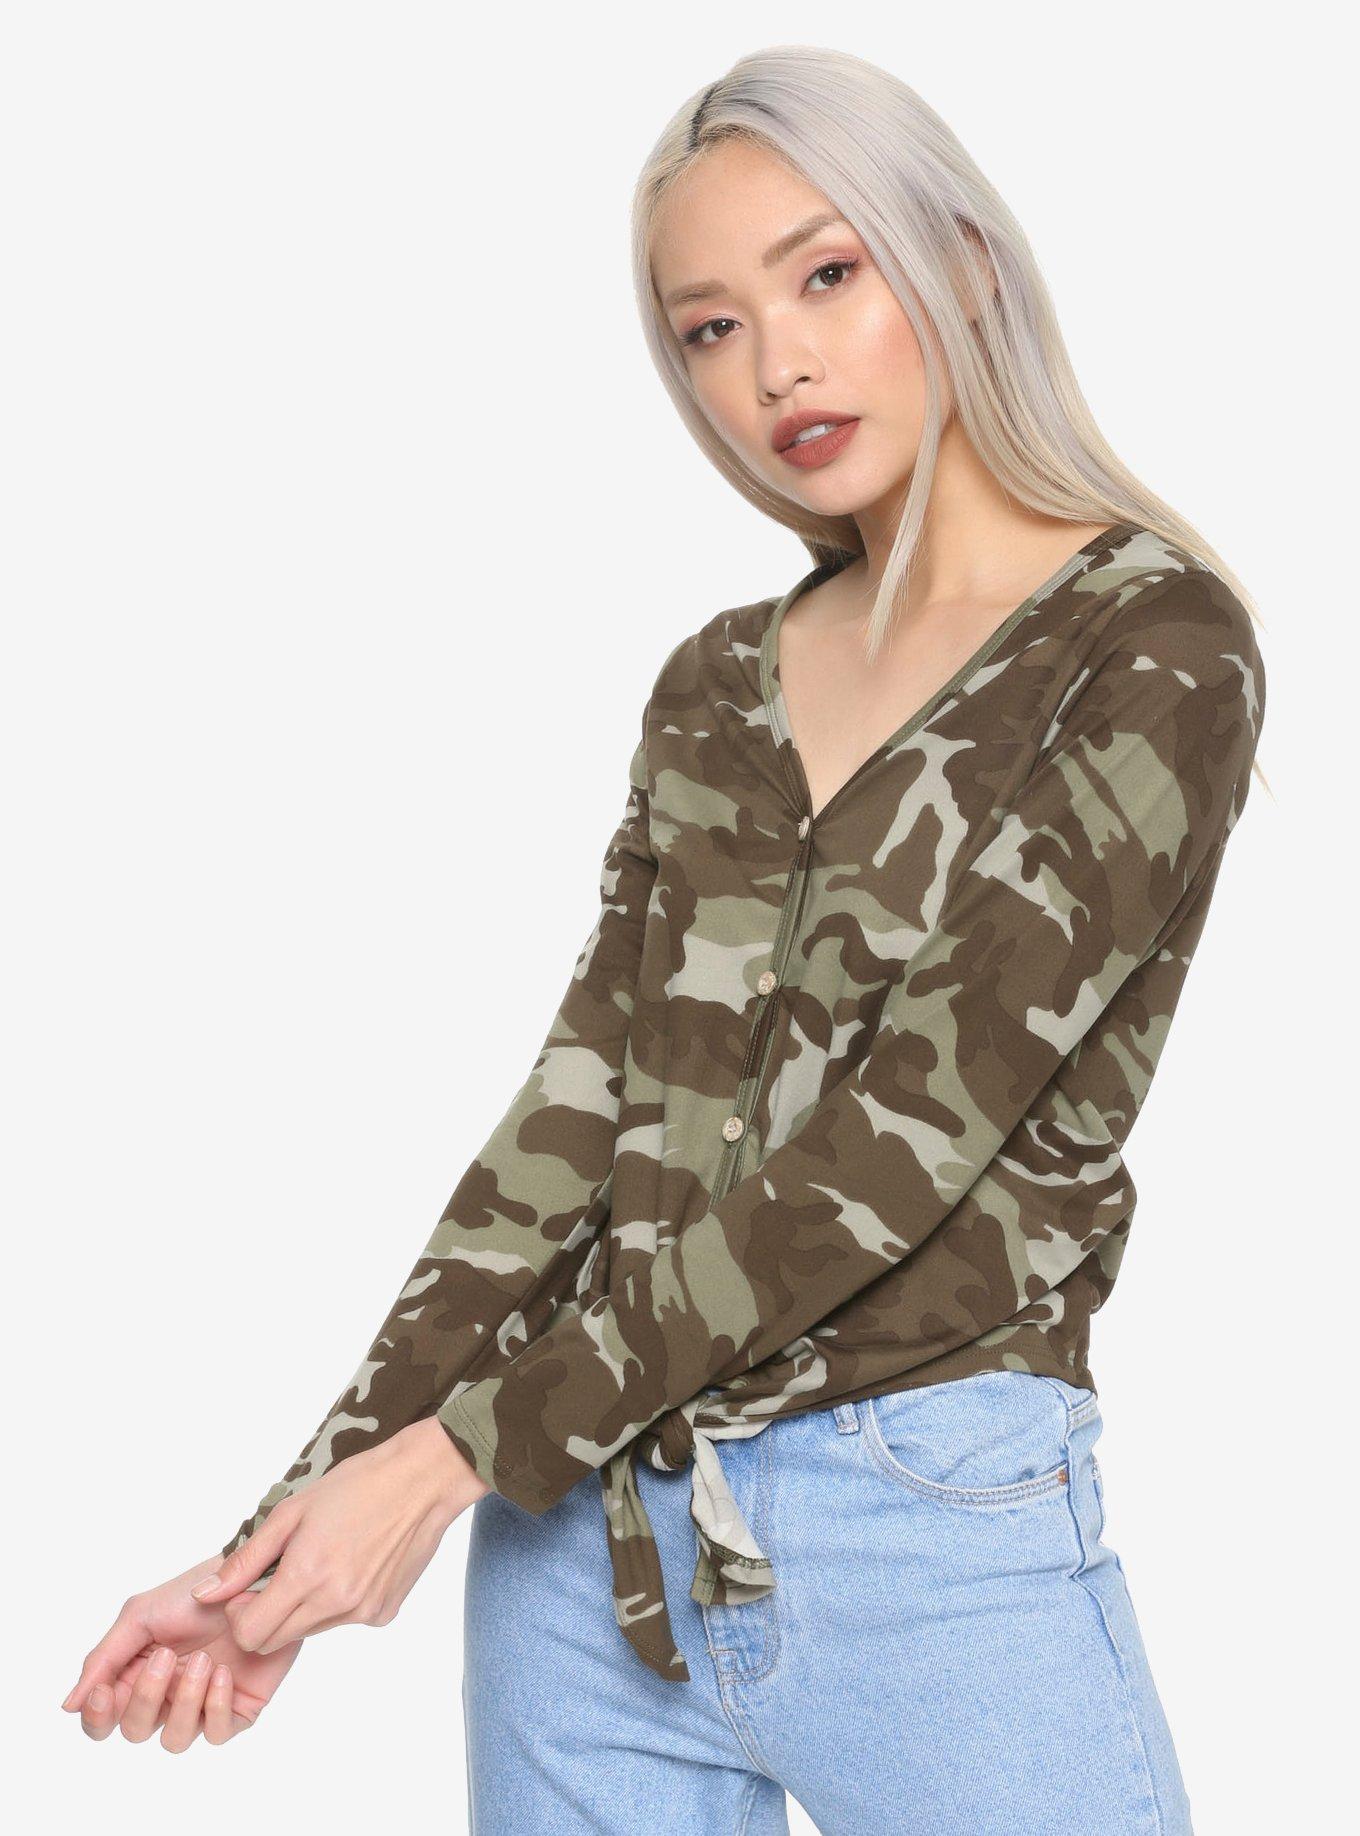 Green Camo Tie-Front Girls Top, ARMY GREEN, hi-res